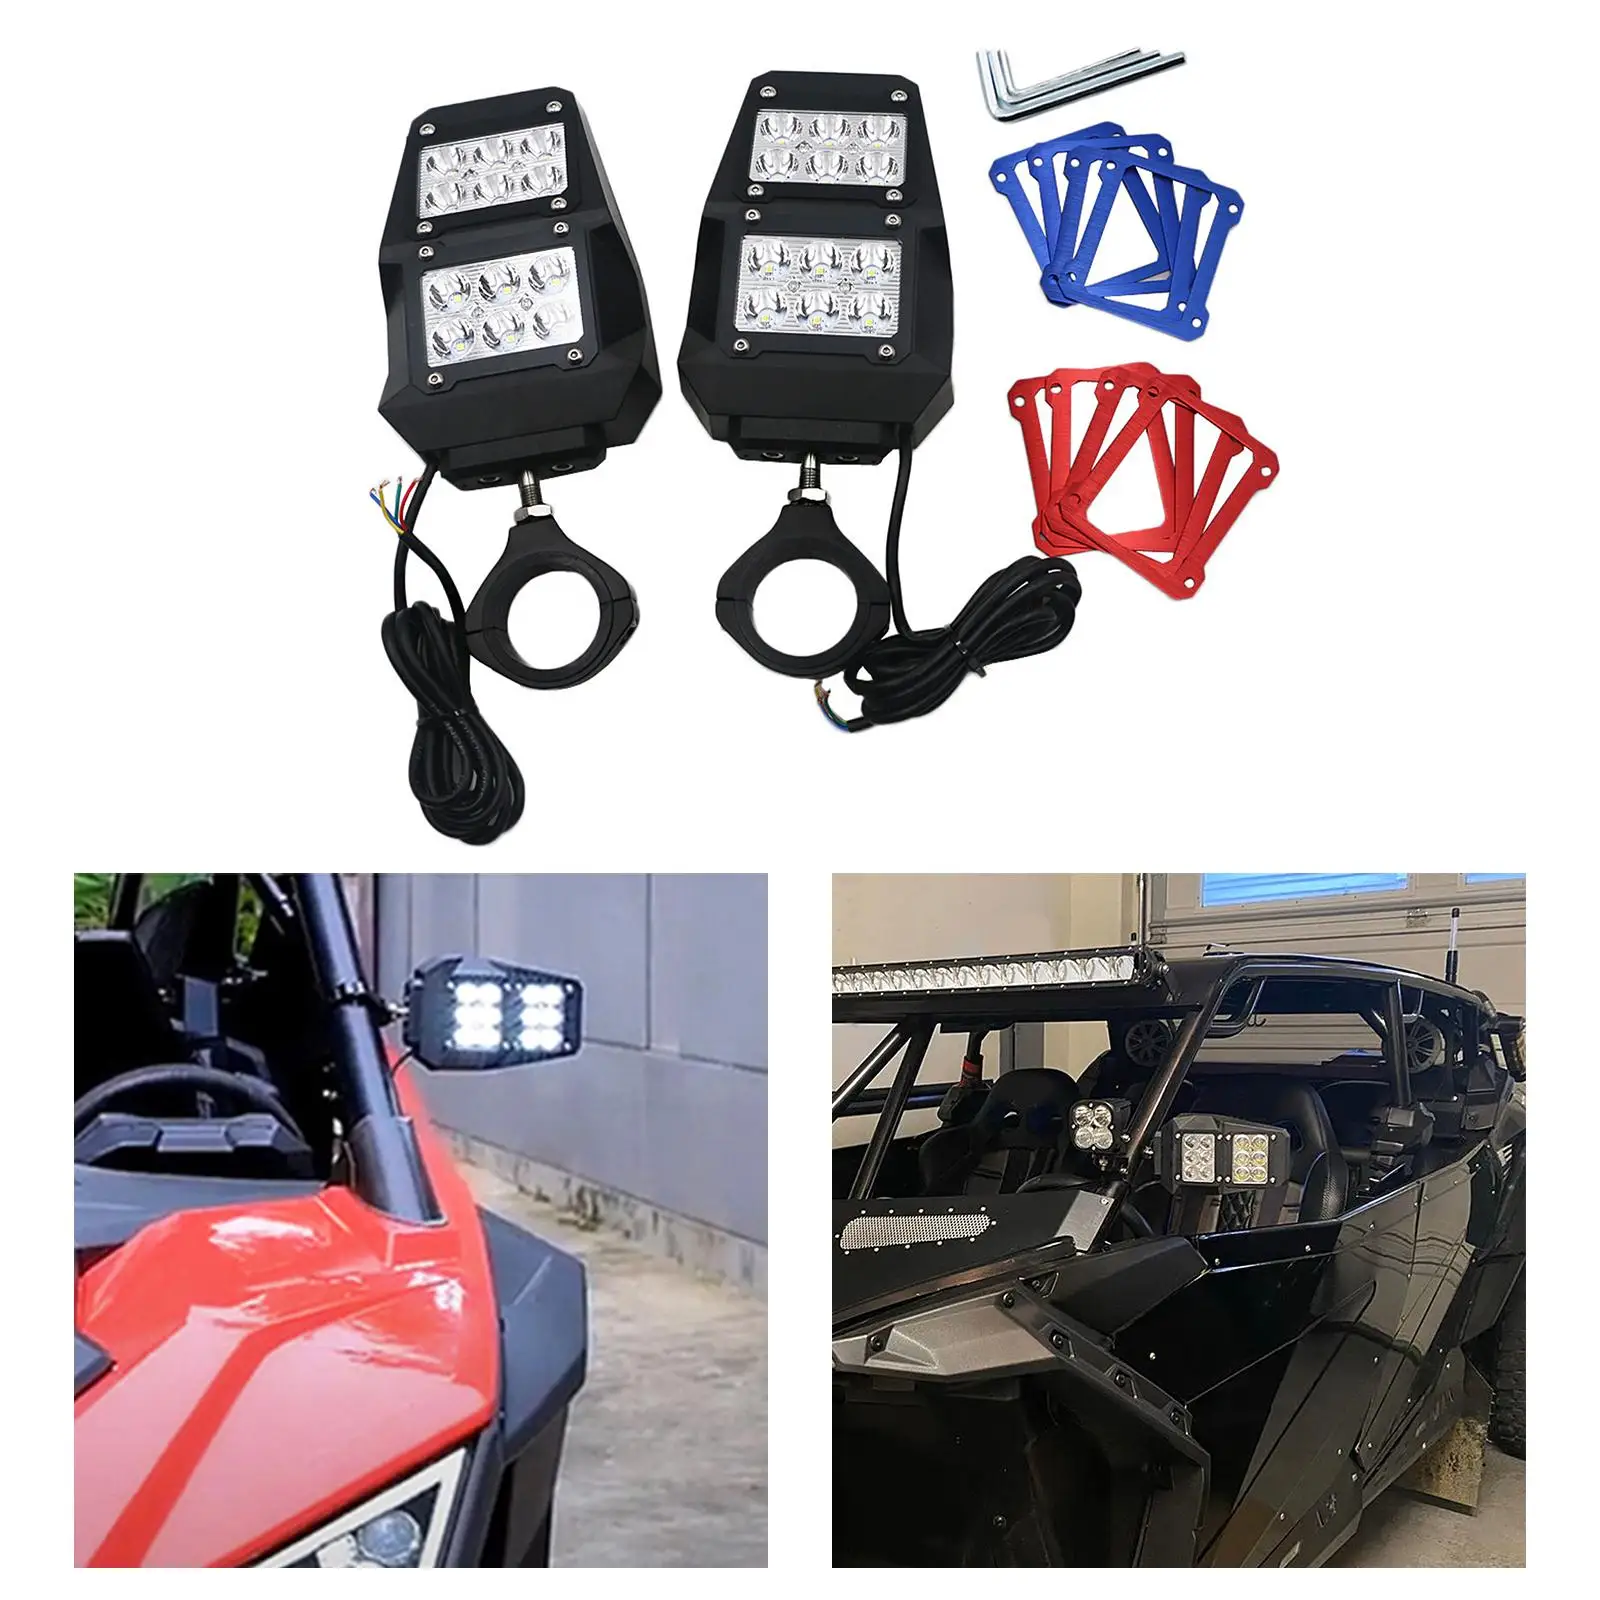 All Topography Vehicle UTV/ATV Mirror with Light Rustproof ABS Fit for Auto